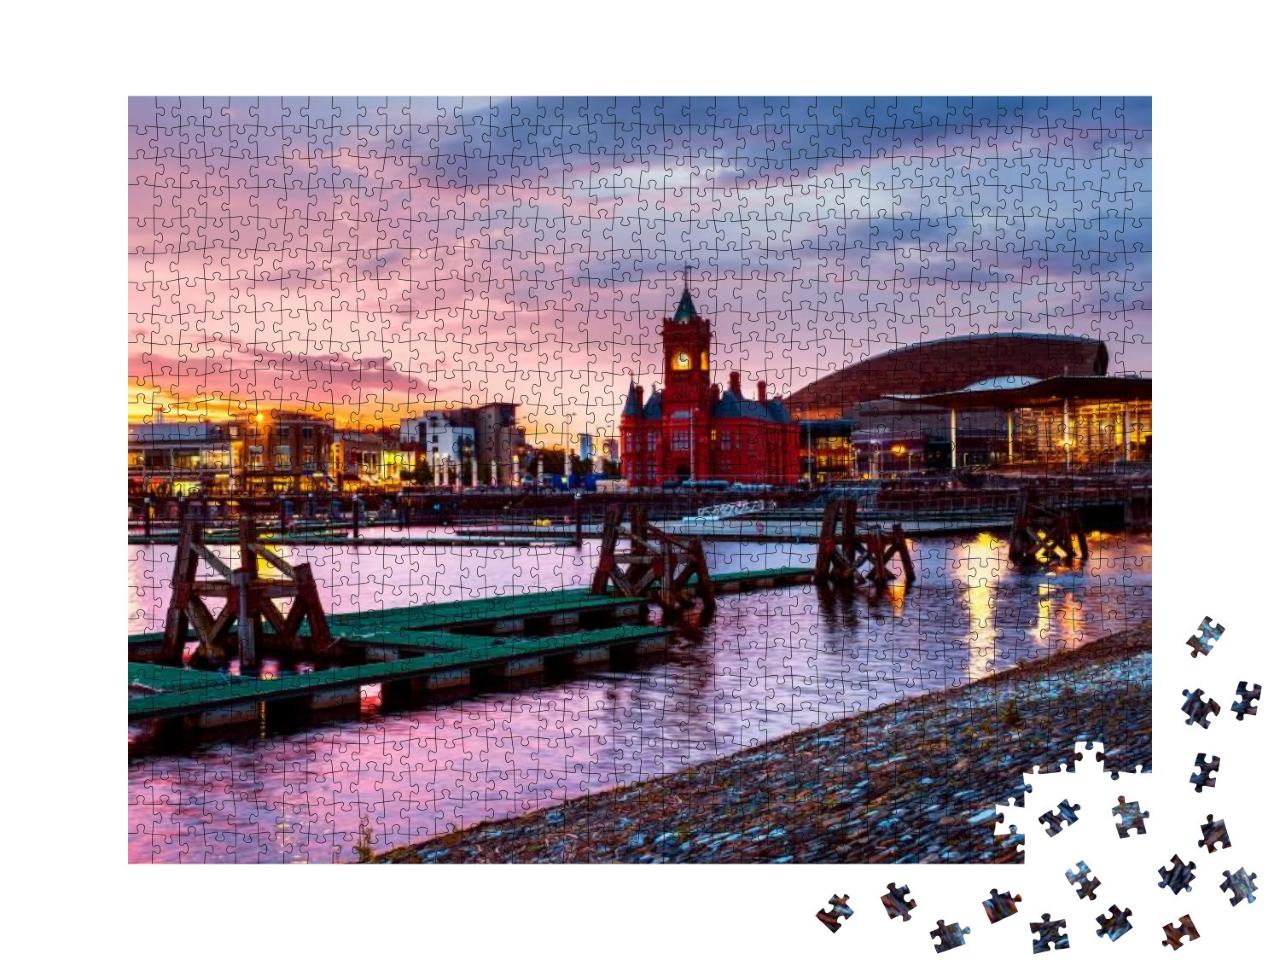 Cardiff, Uk. Waterfront At Night in Cardiff, Uk. Sunset C... Jigsaw Puzzle with 1000 pieces